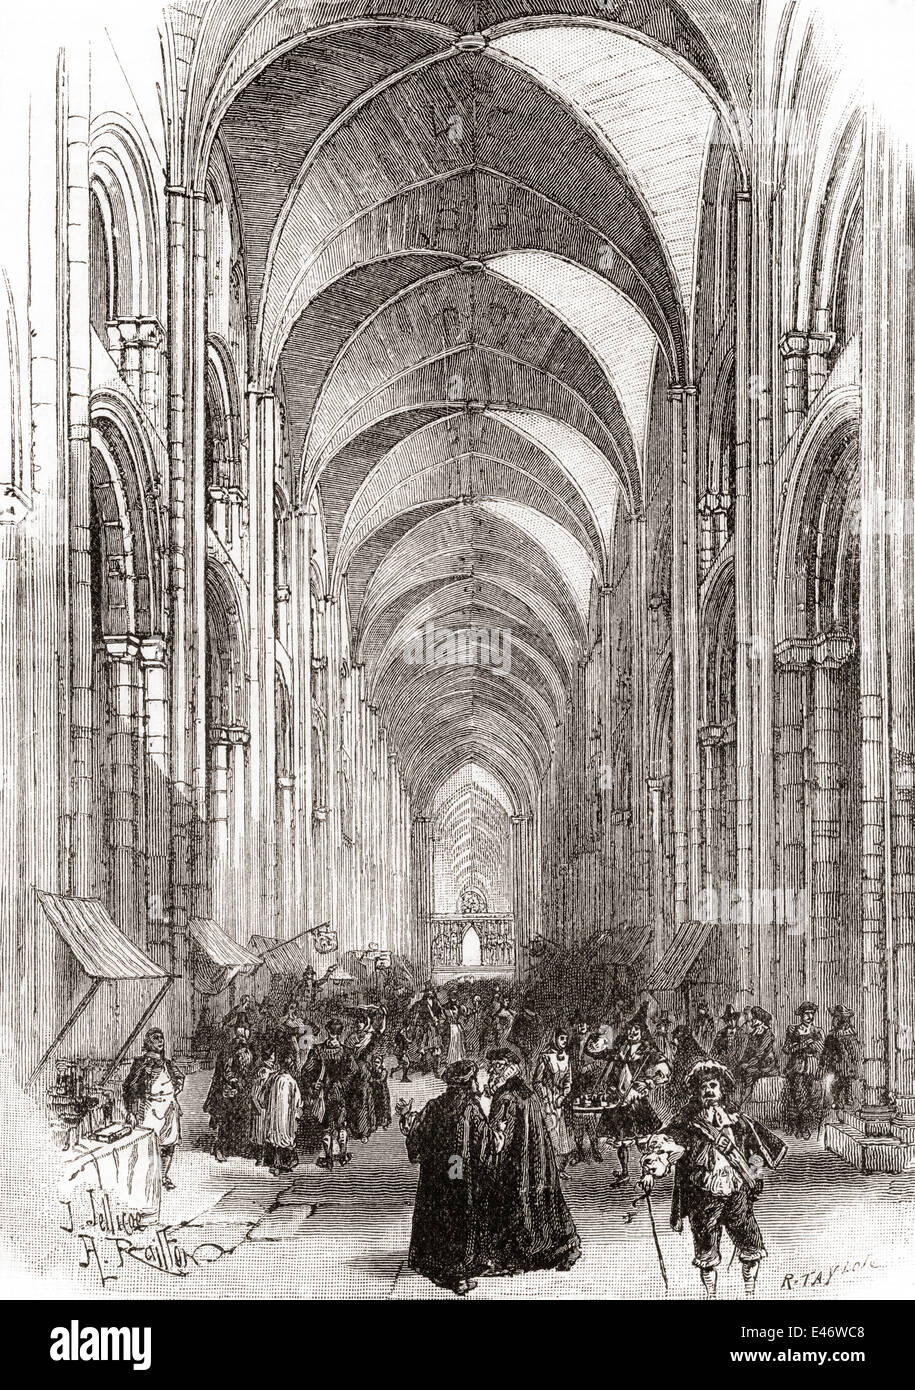 Interior of Old St. Pauls Cathedral, London, England before its destruction in the Great Fire of 1666. Stock Photo